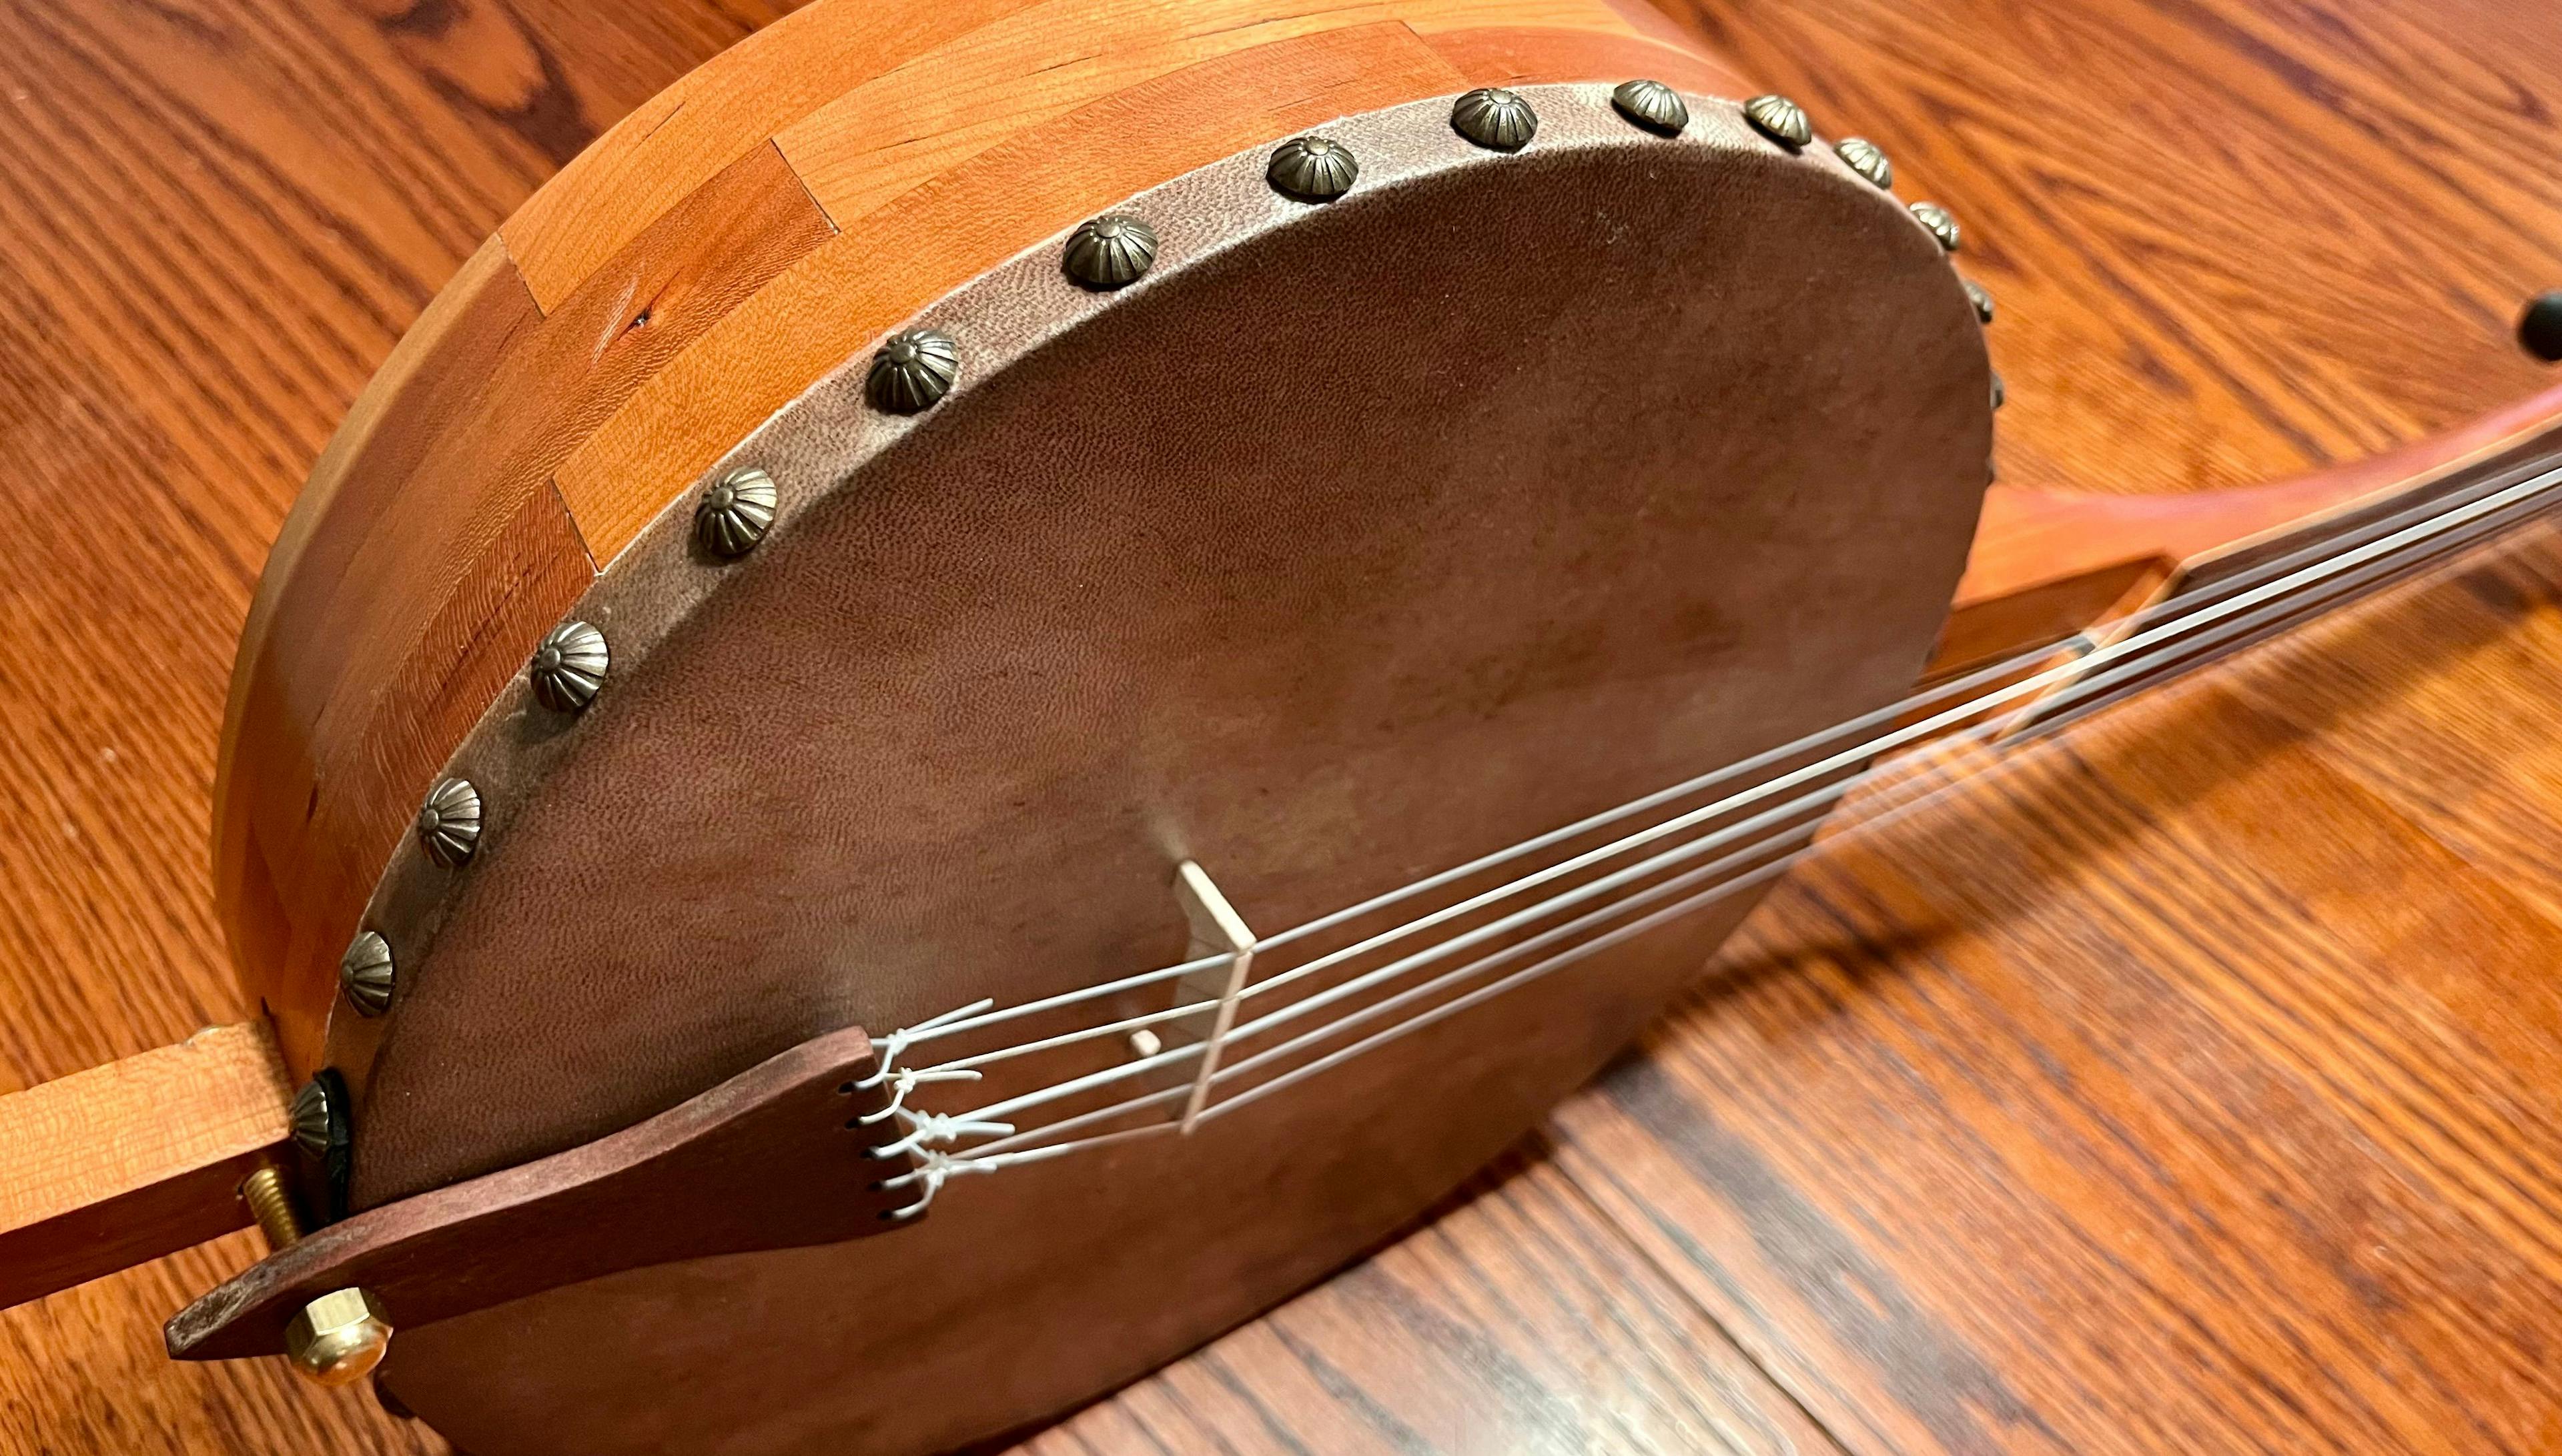 View of the front of the banjo